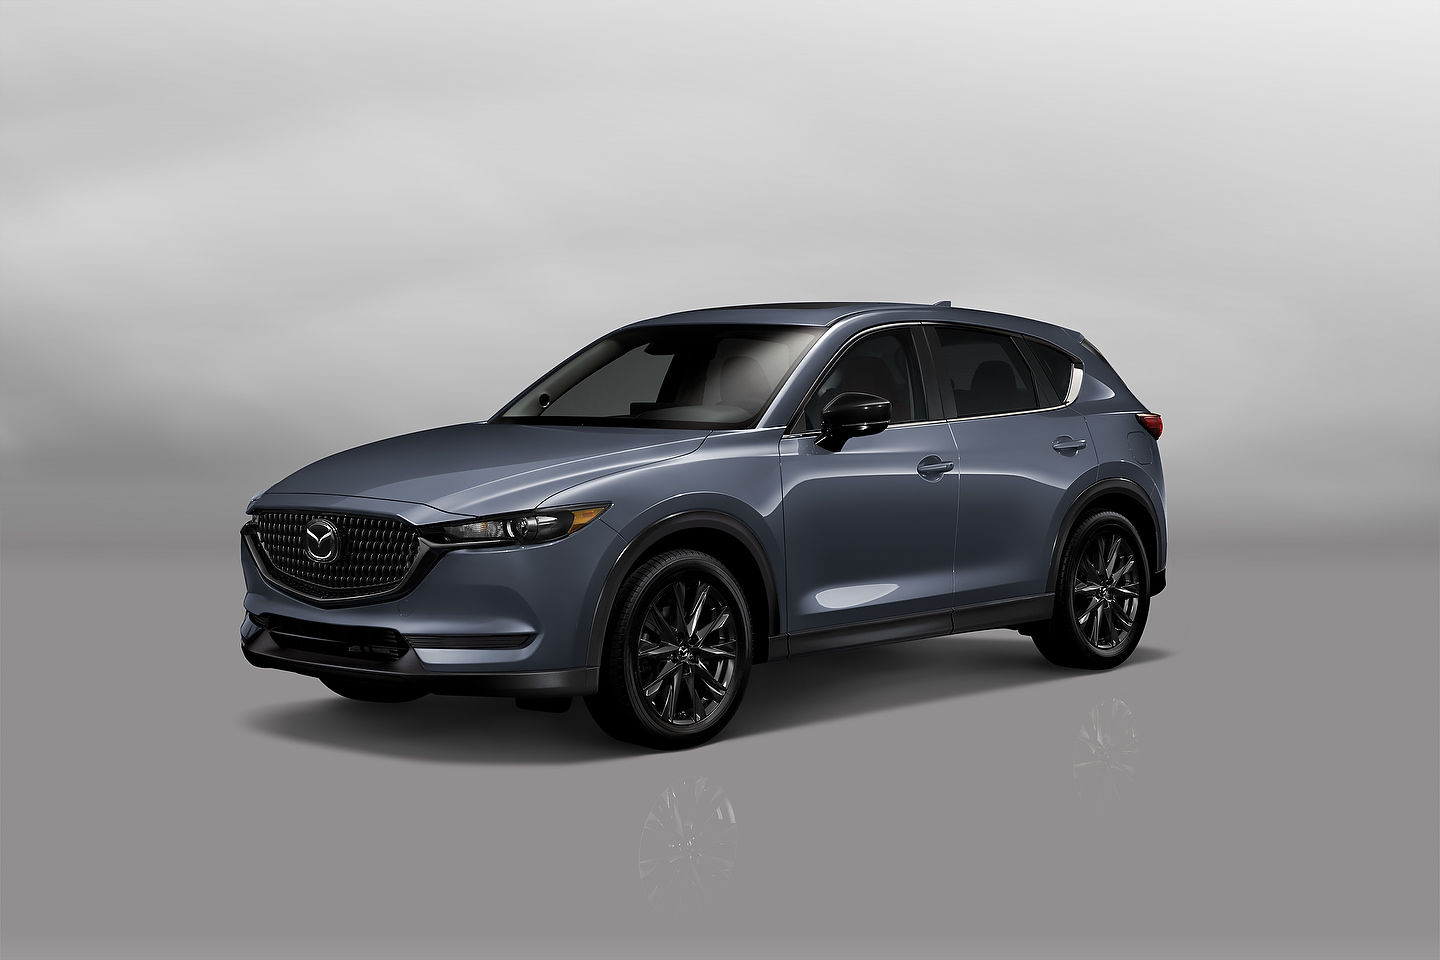 2021 Mazda CX-5 Equipment and Price Overview